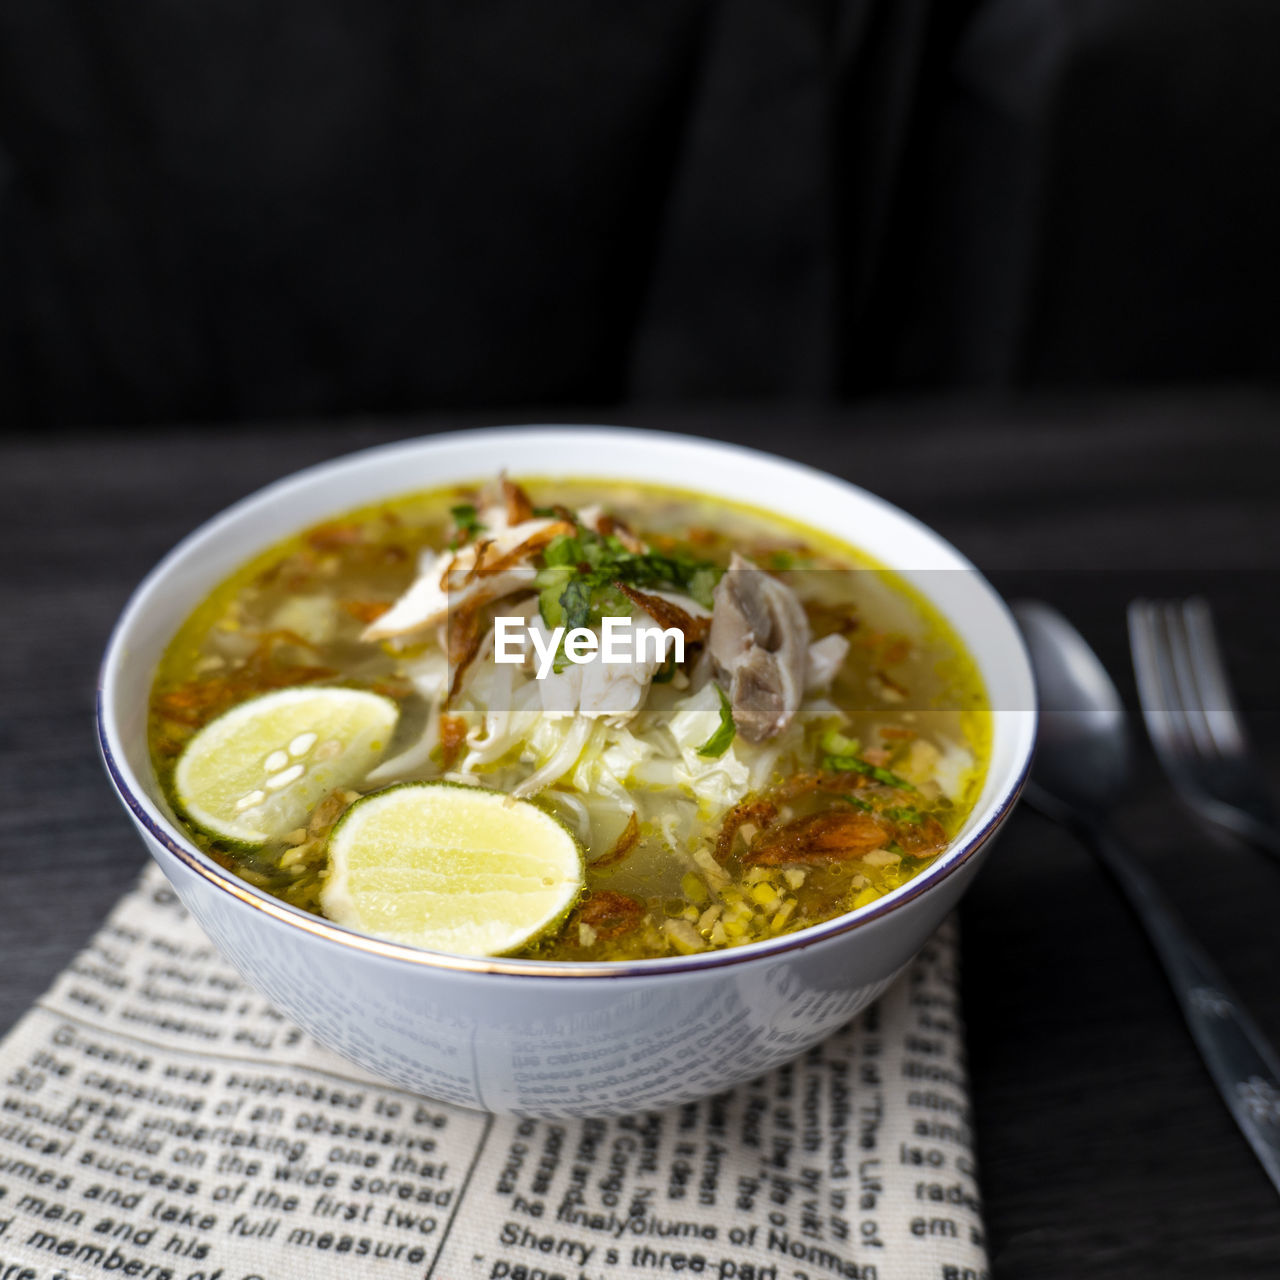 Soto ayam, indonesian food, photographed with cutlery